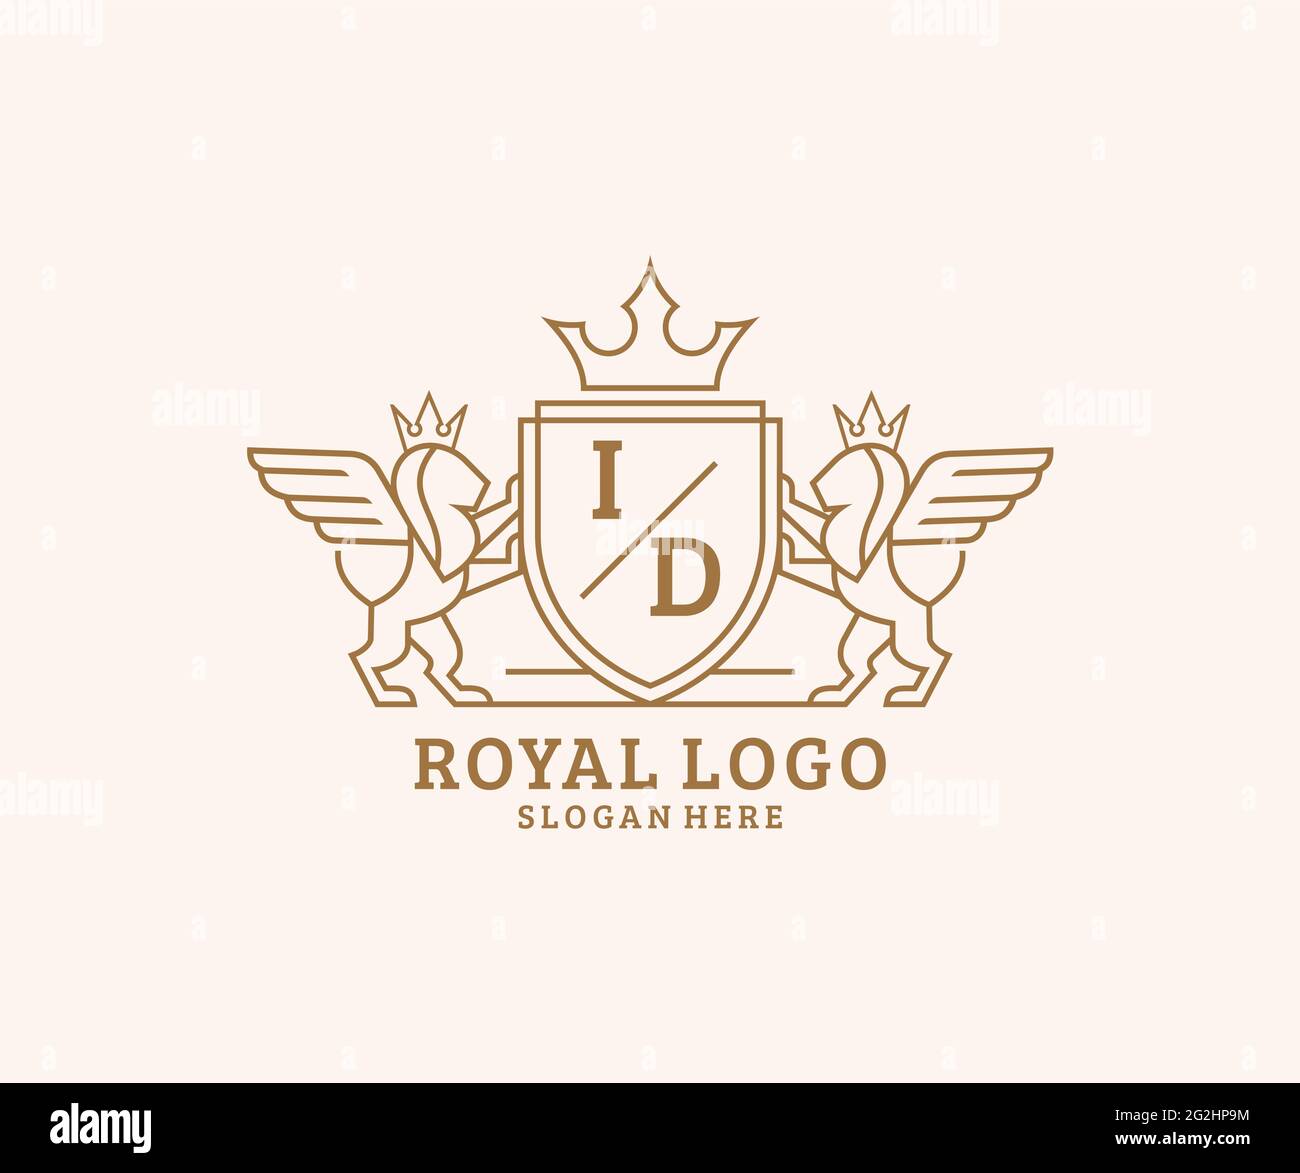 ID Letter Lion Royal Luxury Heraldic,Crest Logo template in vector art for Restaurant, Royalty, Boutique, Cafe, Hotel, Heraldic, Jewelry, Fashion and Stock Vector